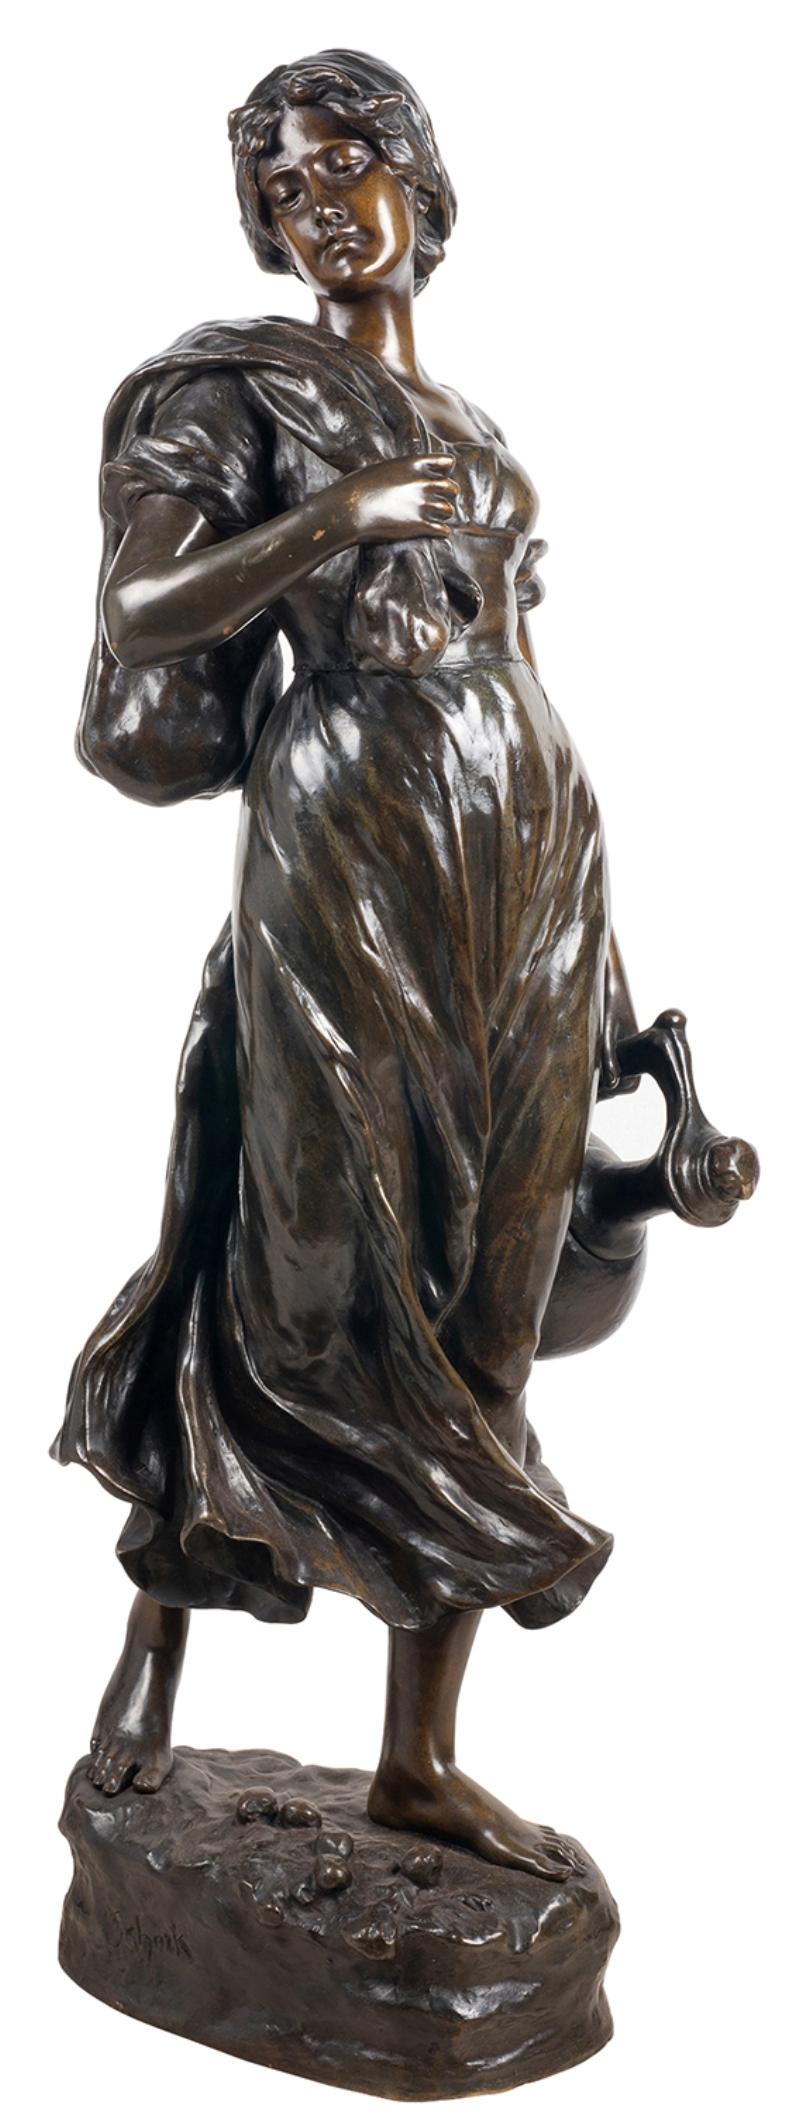 A enchanting late 19th century patinated bronze statue of a pretty young maiden carrying a water jug and sack. 
Signed; Hans Schork, Austrian, 1849.